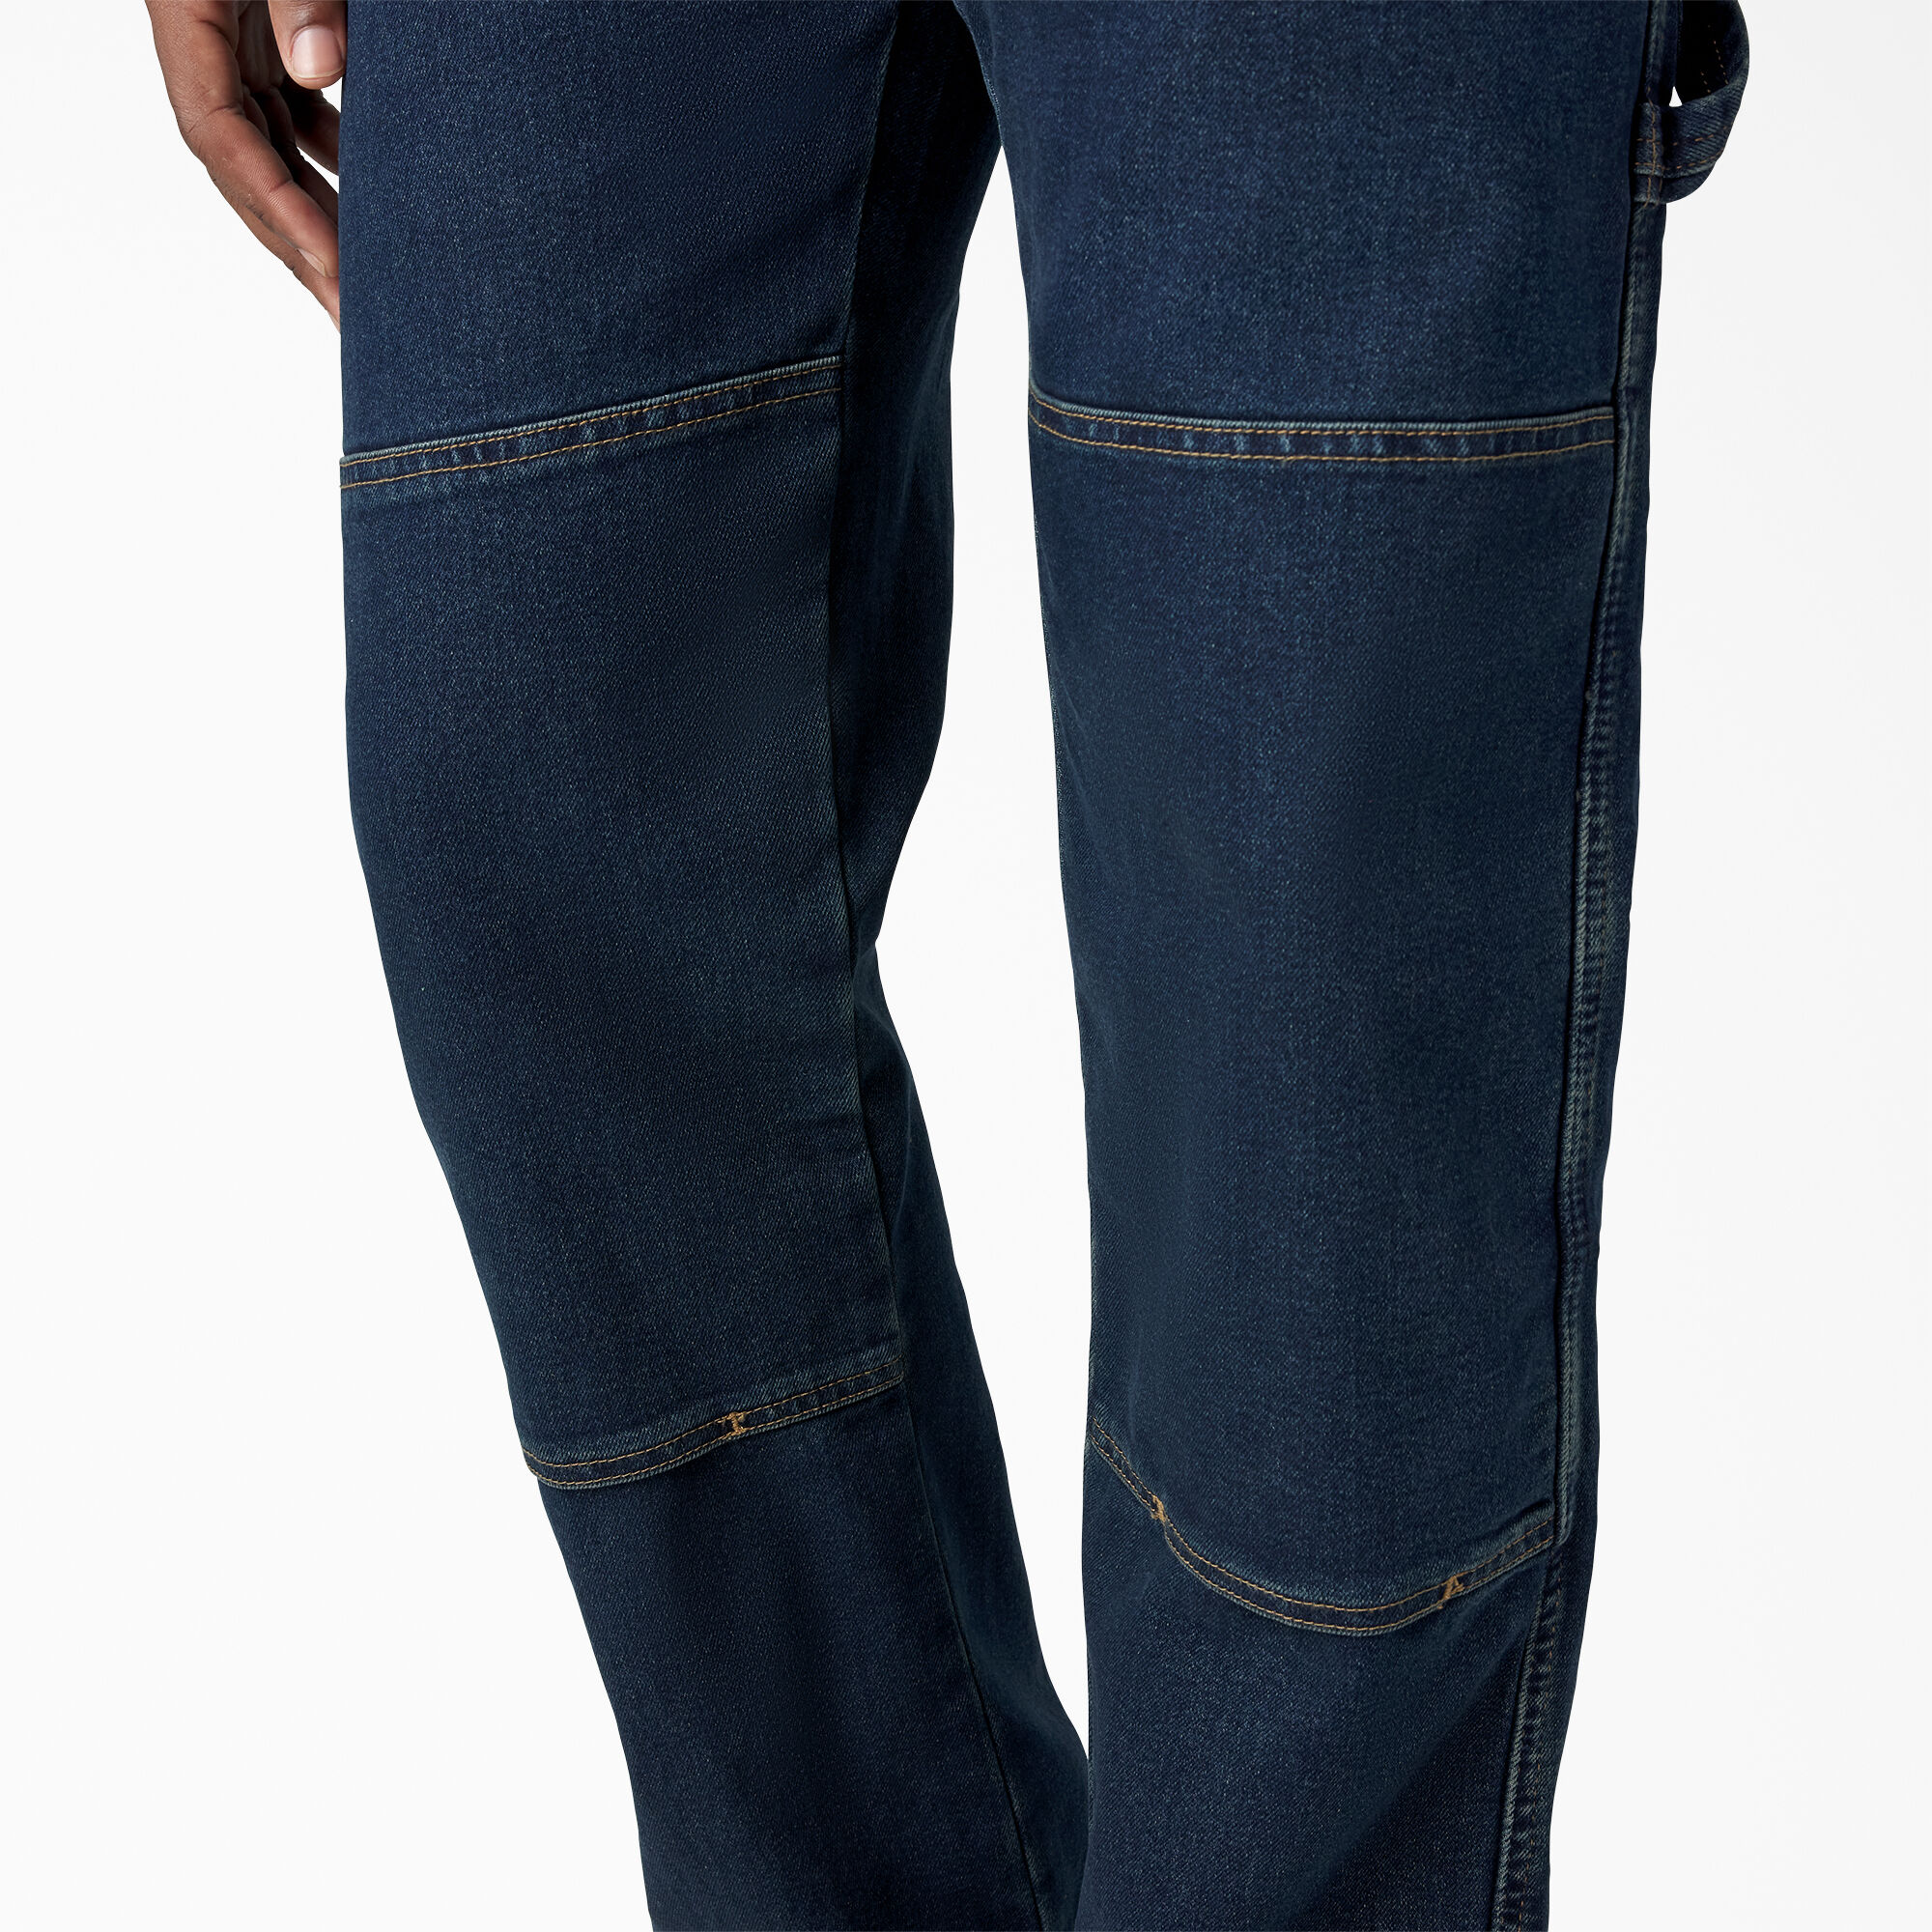 FLEX Relaxed Fit Double Knee Jeans